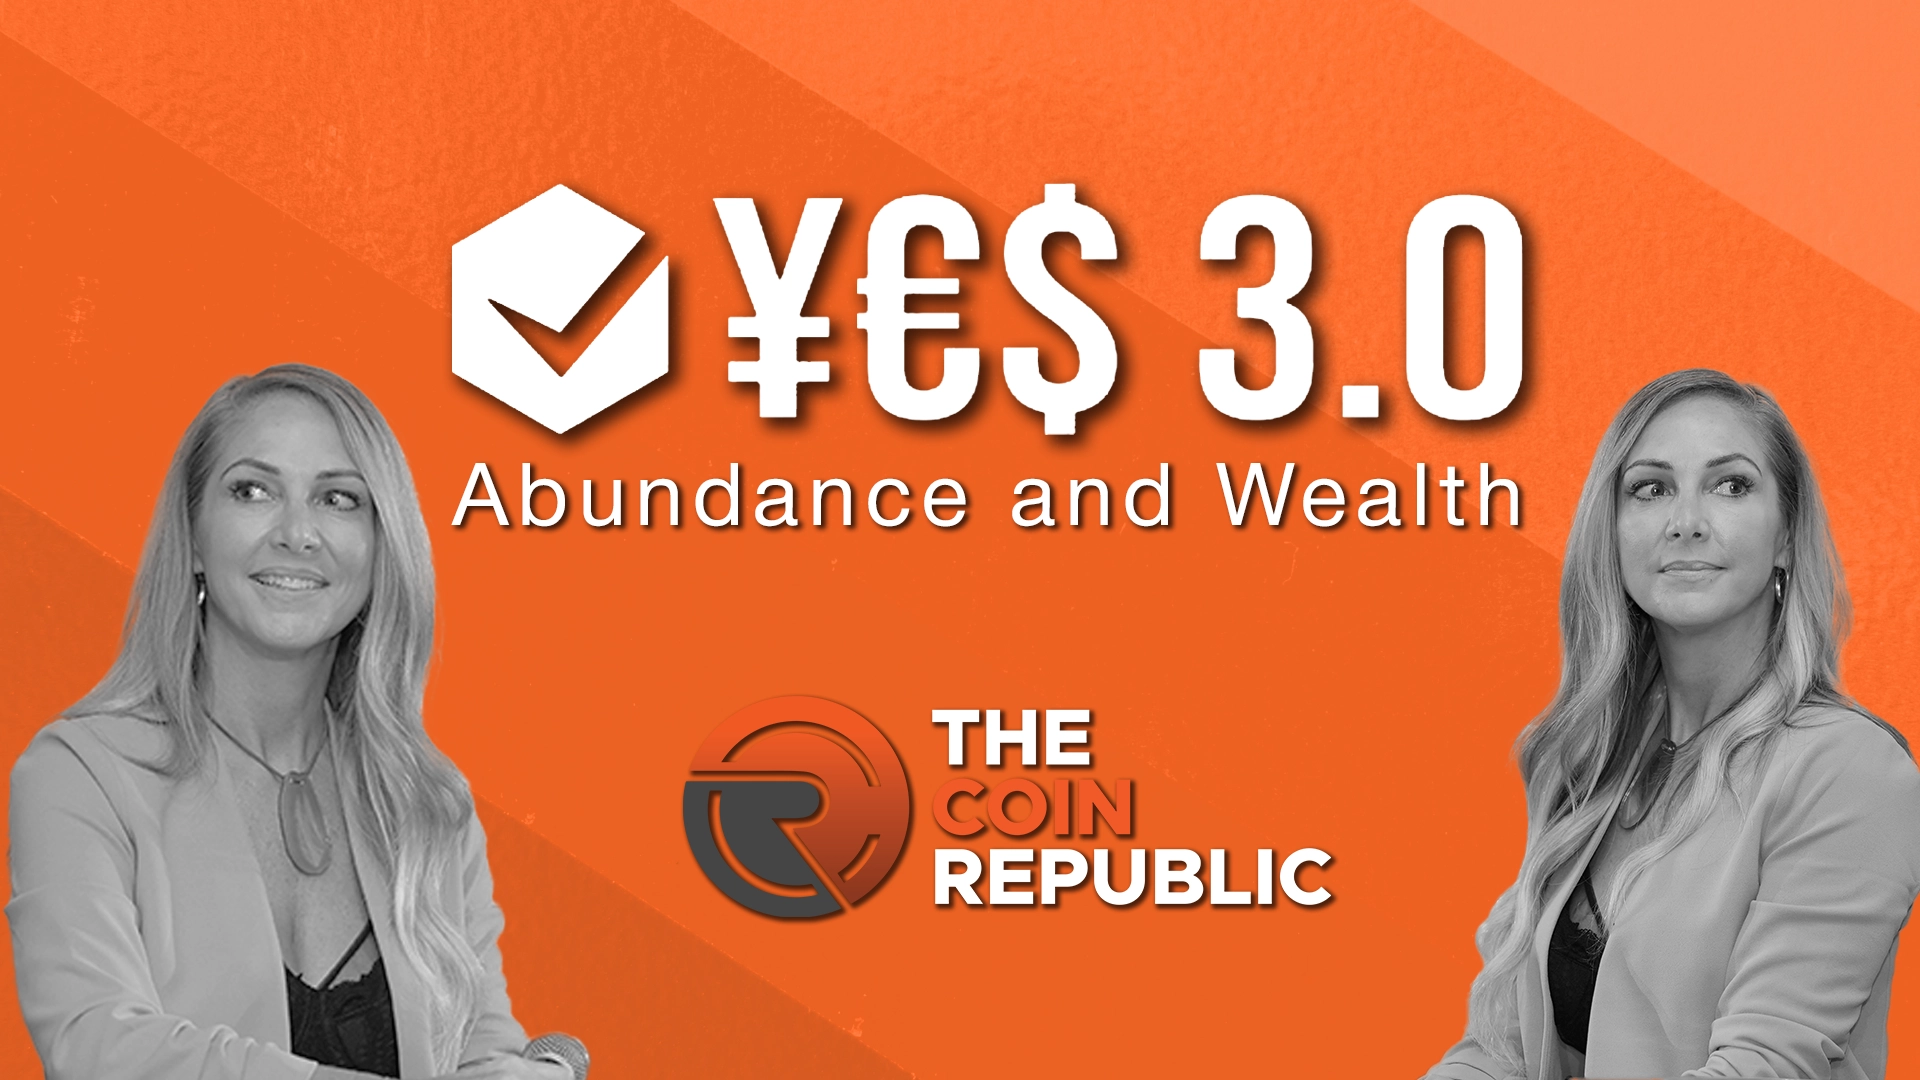 Building Trust on Yes3.0 Abundance and Wealth with Brandi Veil